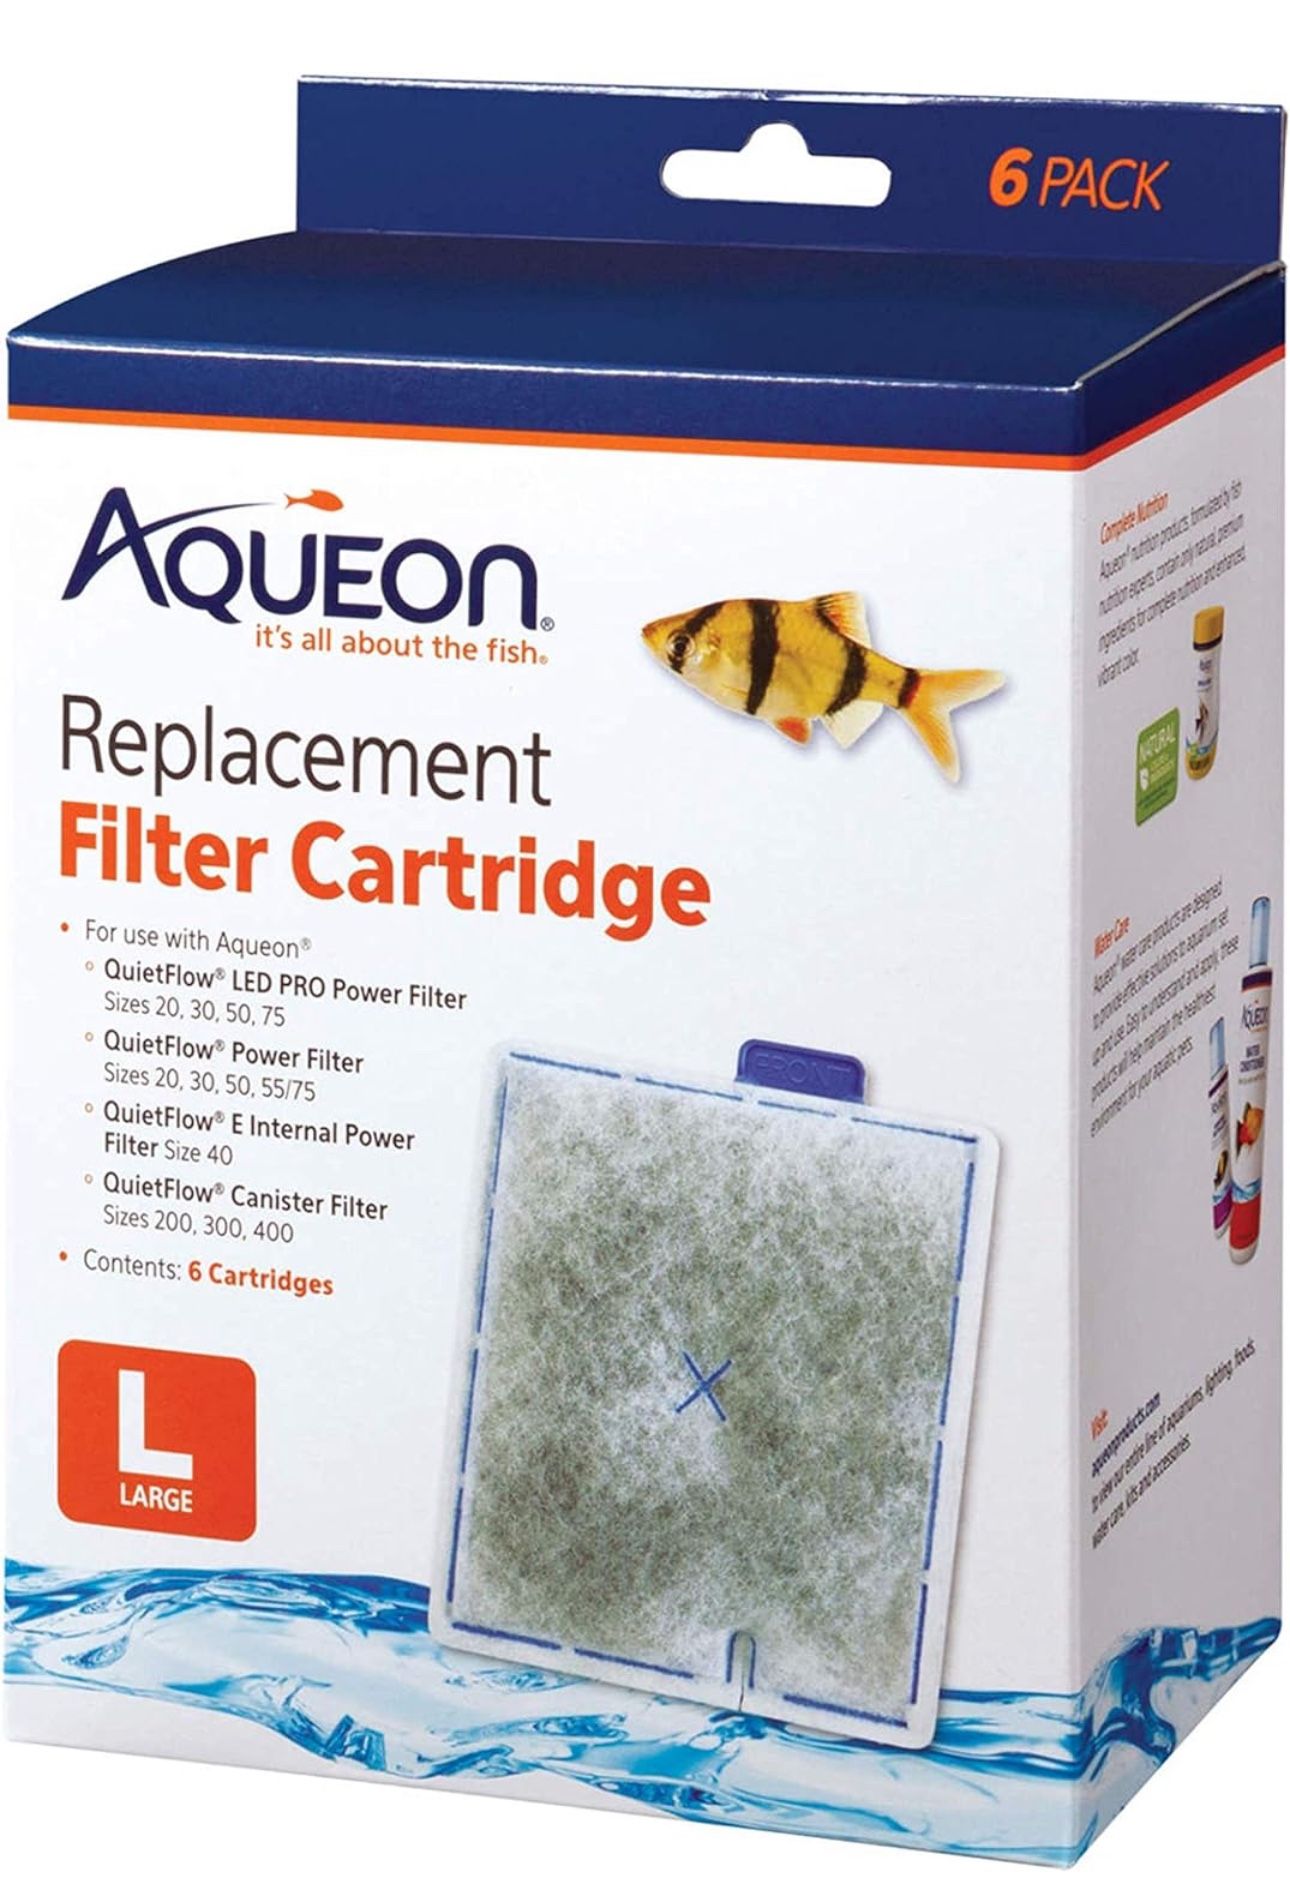 Aqueon Replacement Filter Cartridges Large (6 pack), Ensure Even Distribution of Activated Carbon, 25% More Activated Carbon, Easy Installation